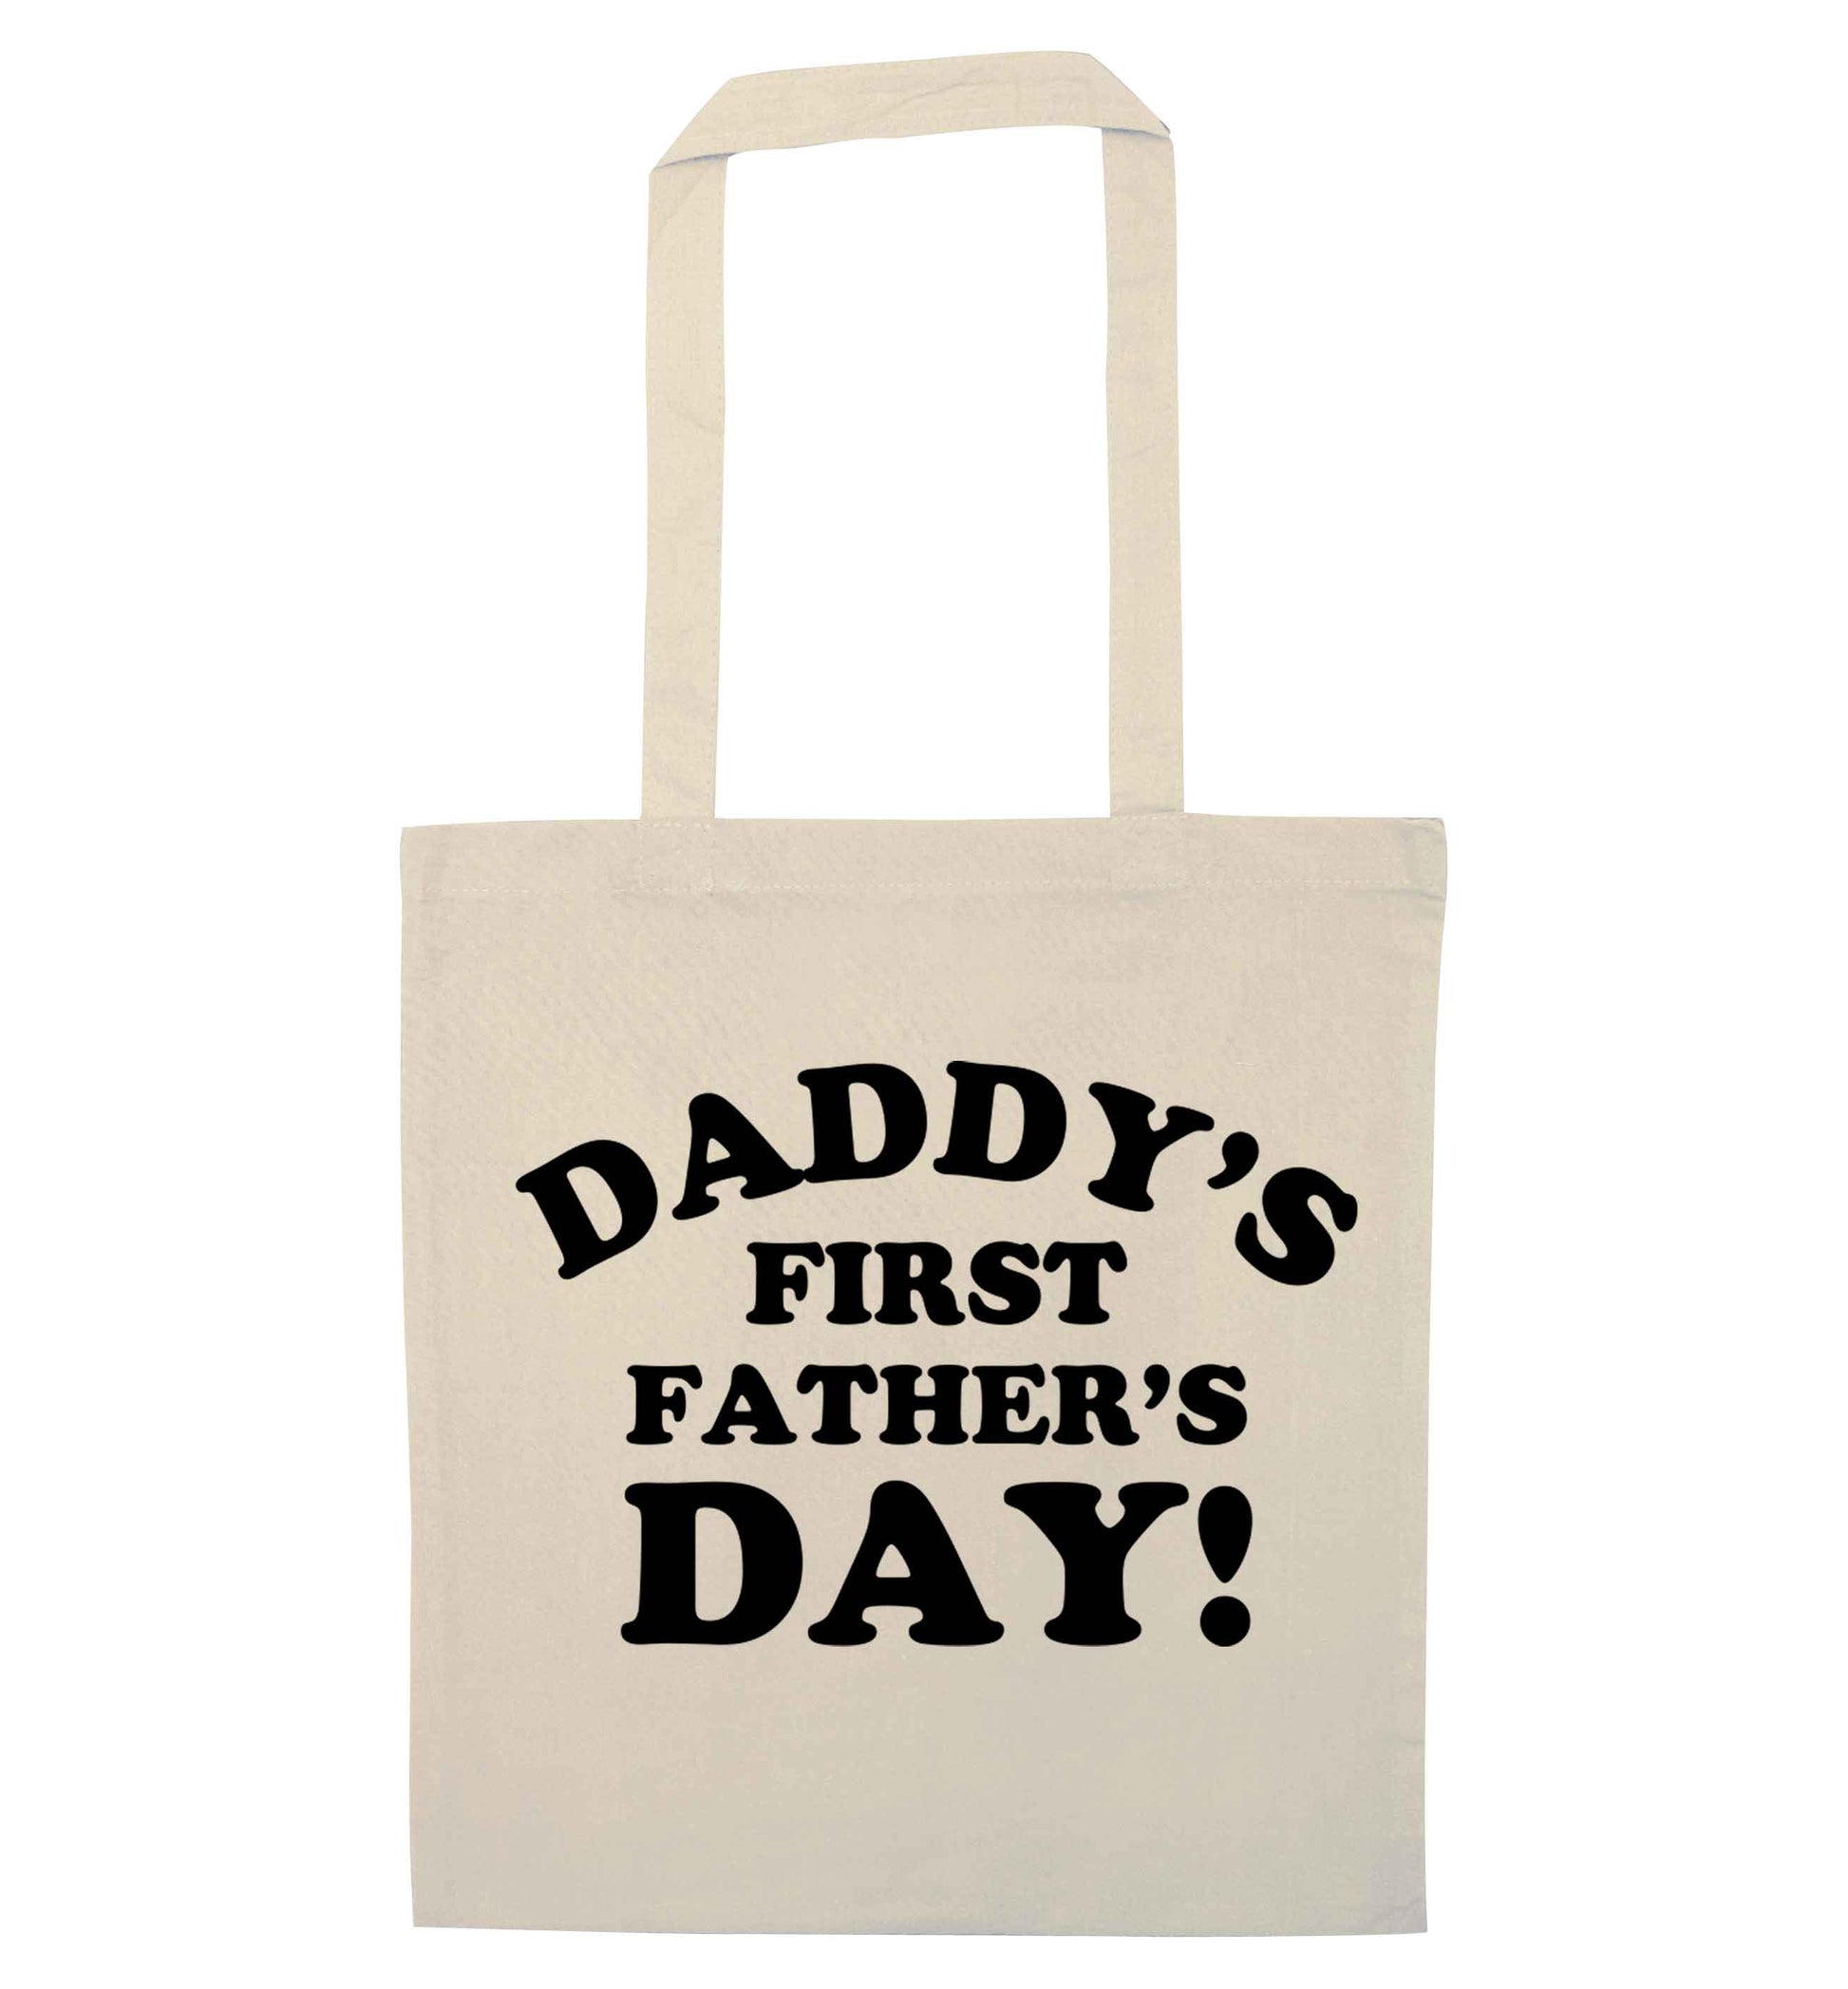 Daddy's first father's day natural tote bag